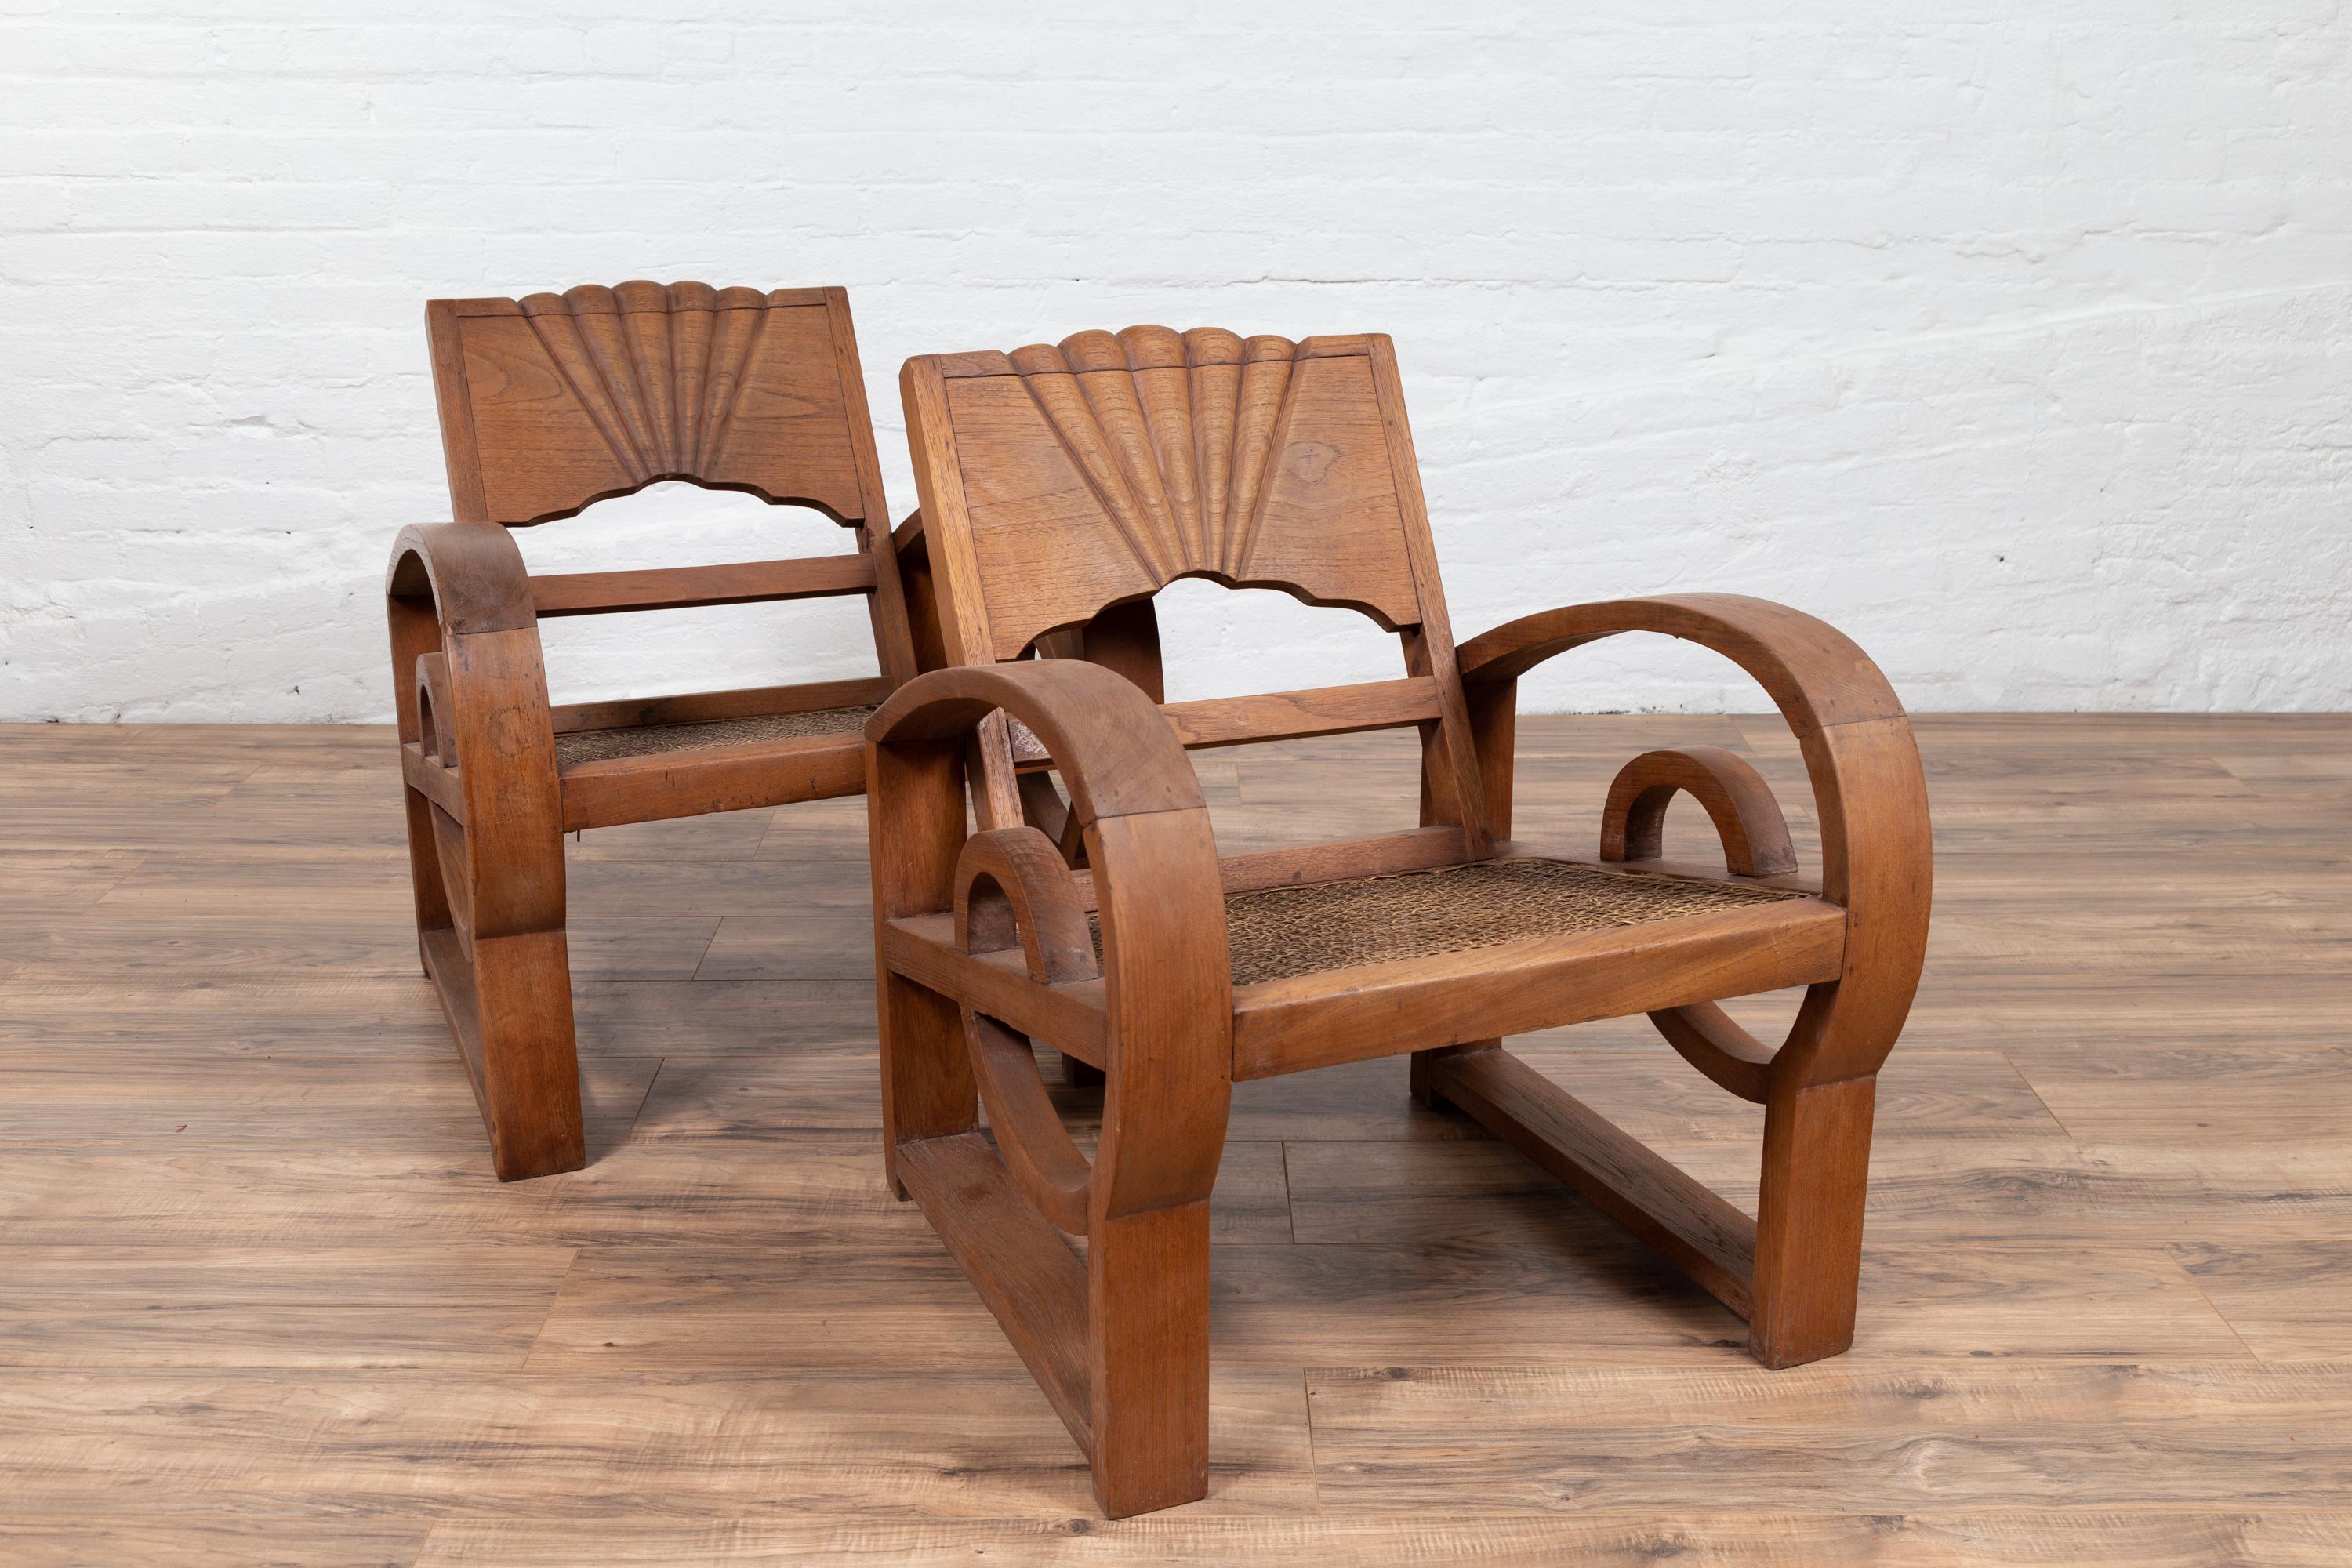 Pair of Teak Wood Country Chairs from Madura with Rattan Seats and Looping Arms 7